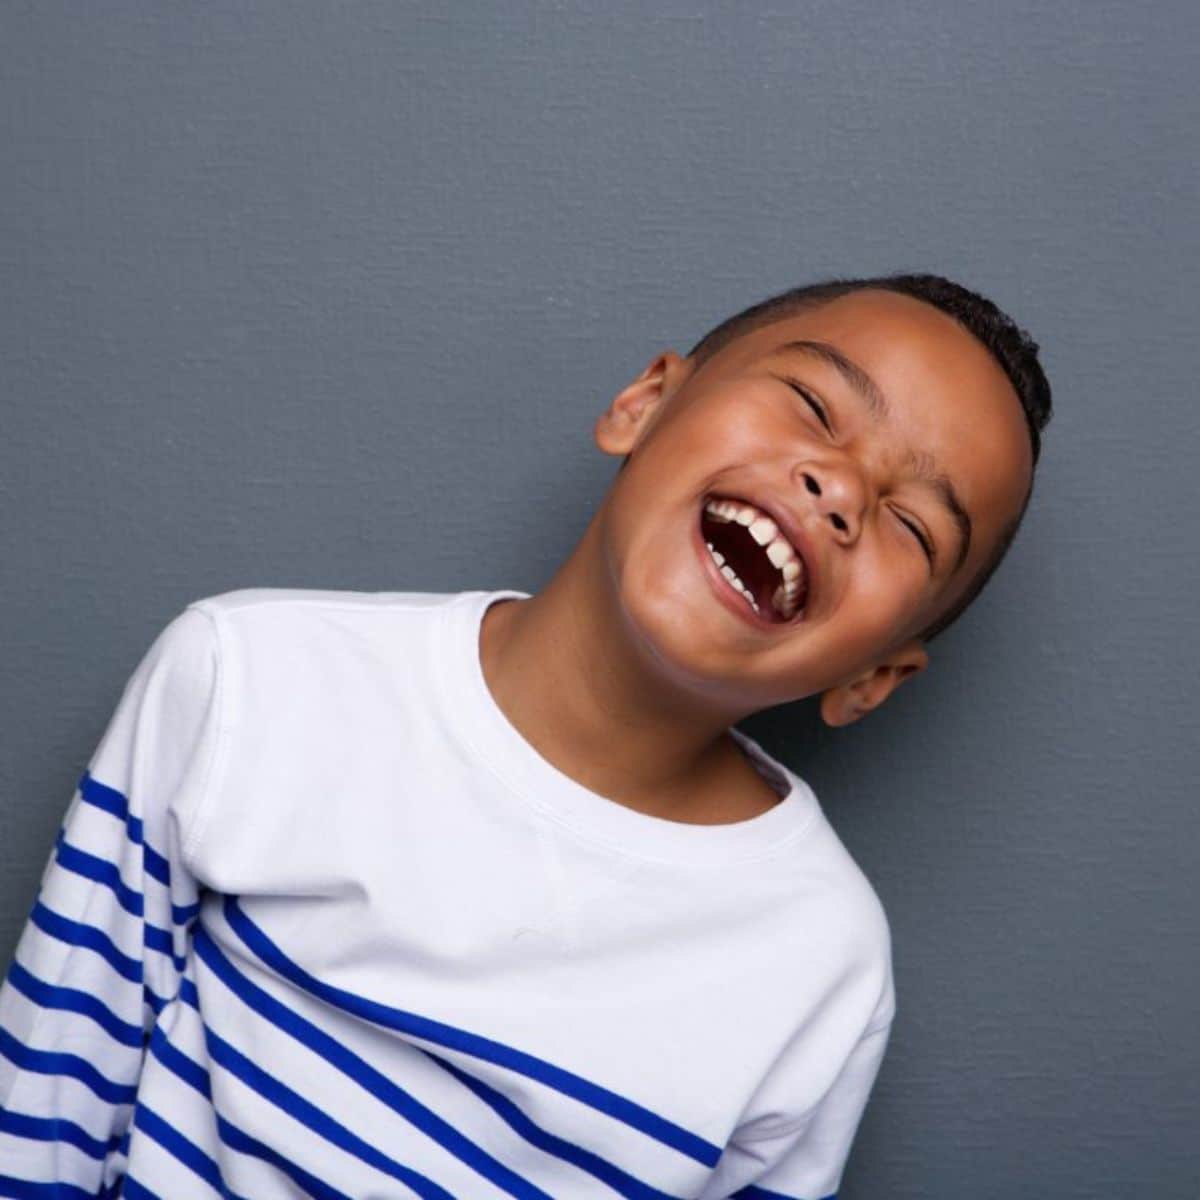 Young black kid laughing.